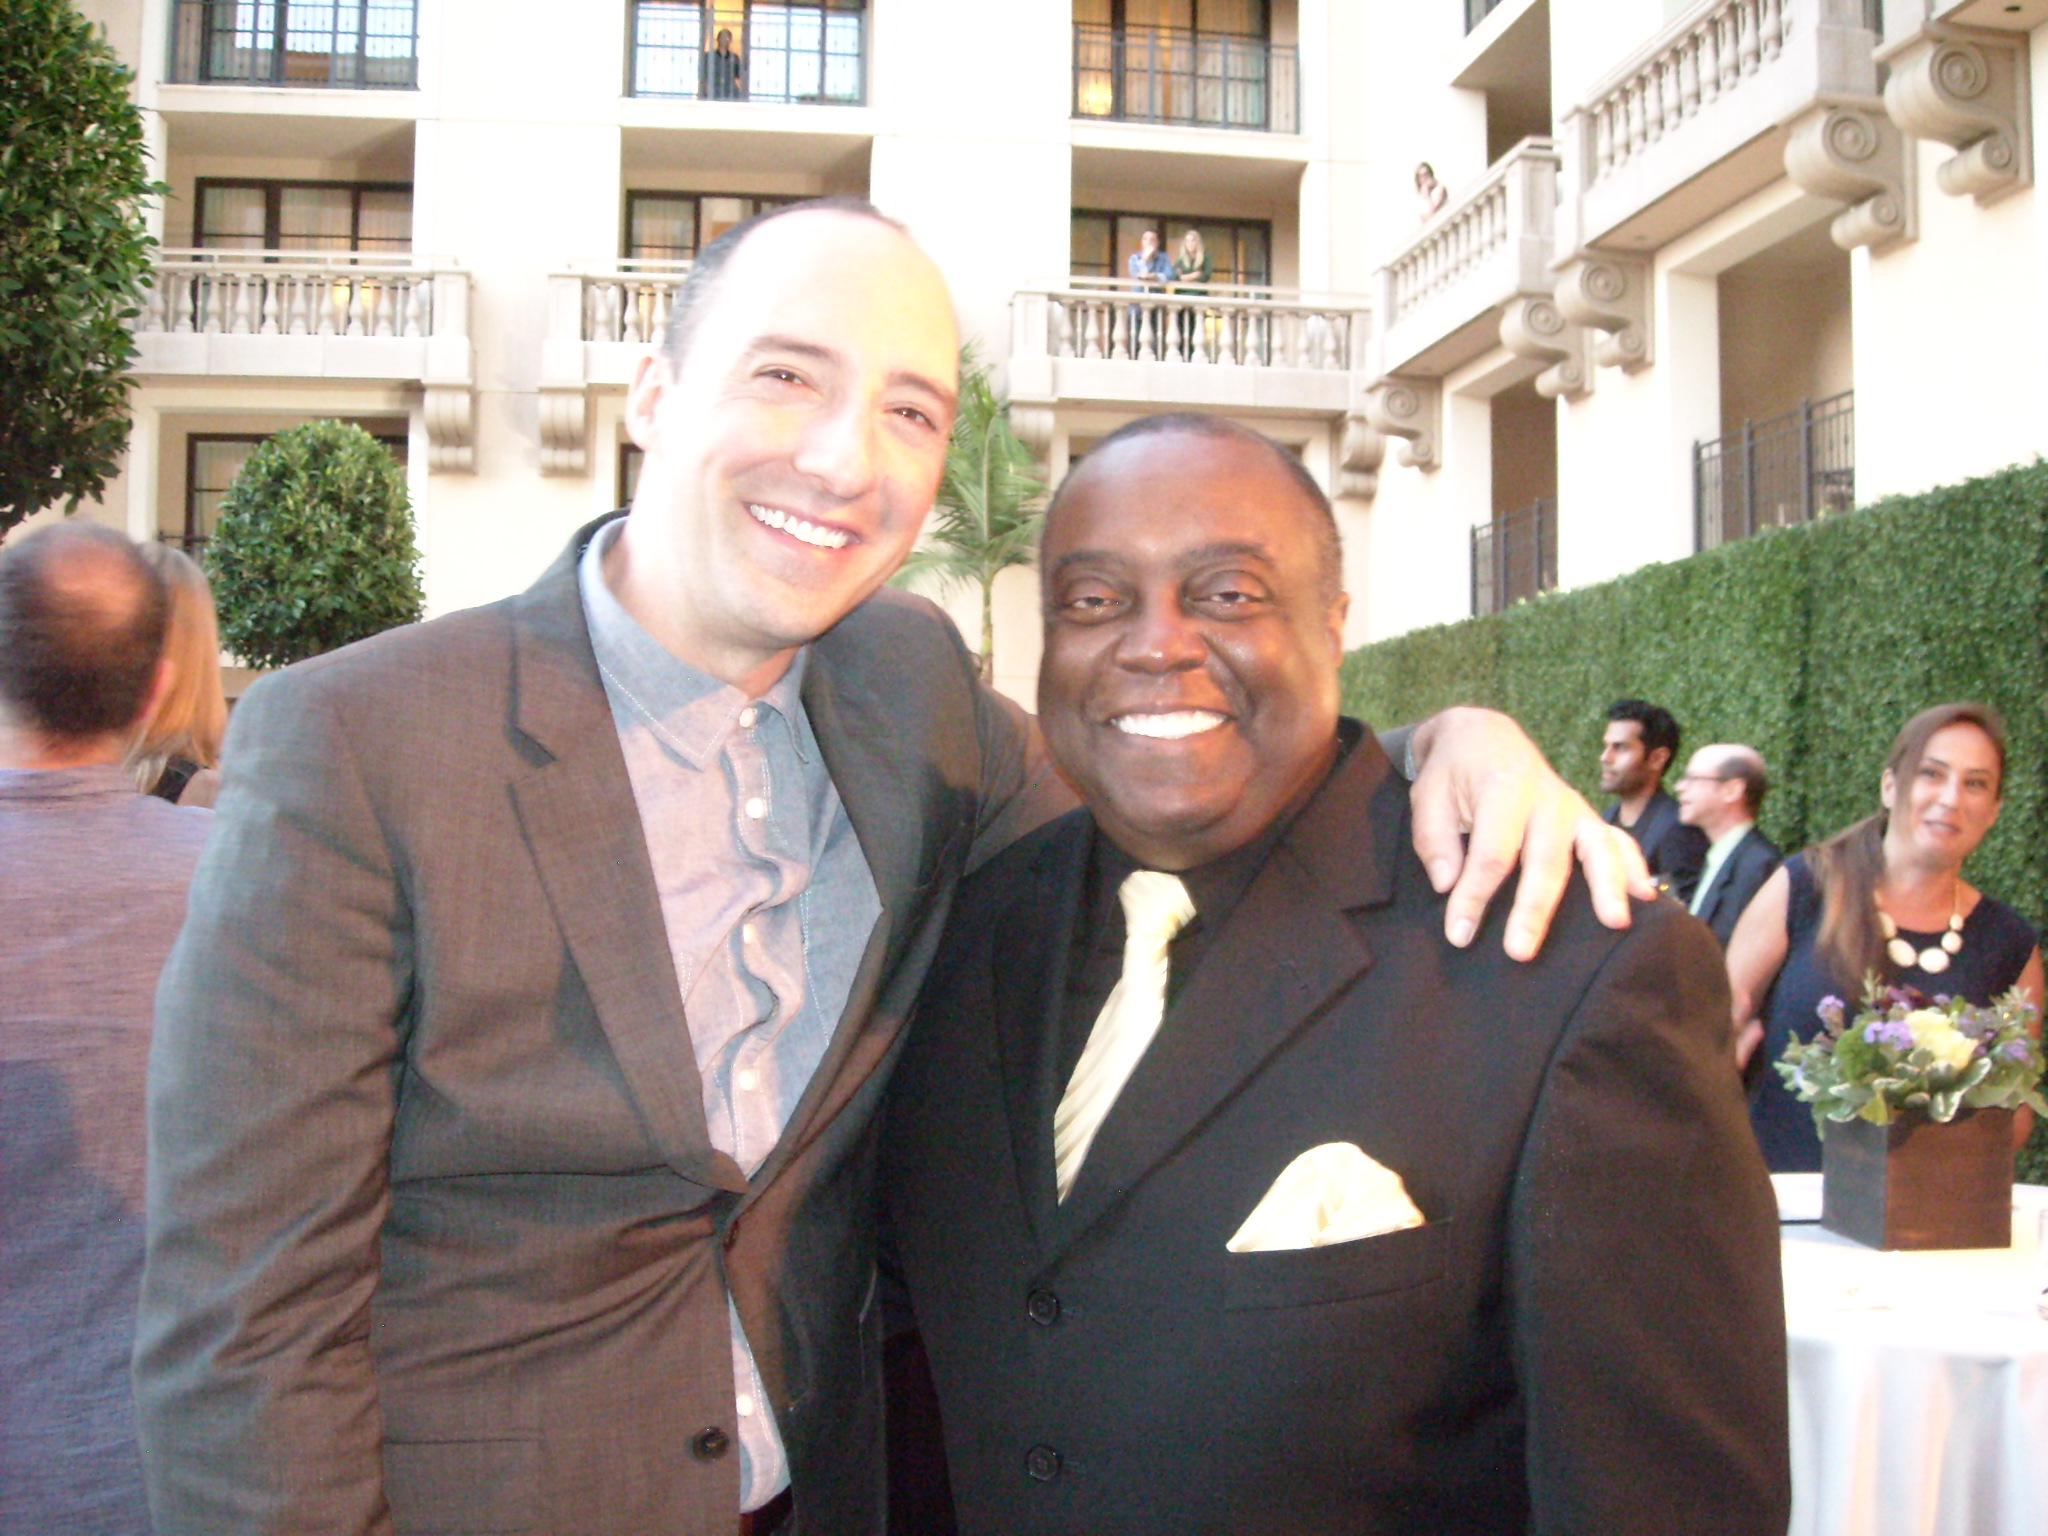 Emmy winner Tony Hale at the 2014 Emmy Nominees Reception